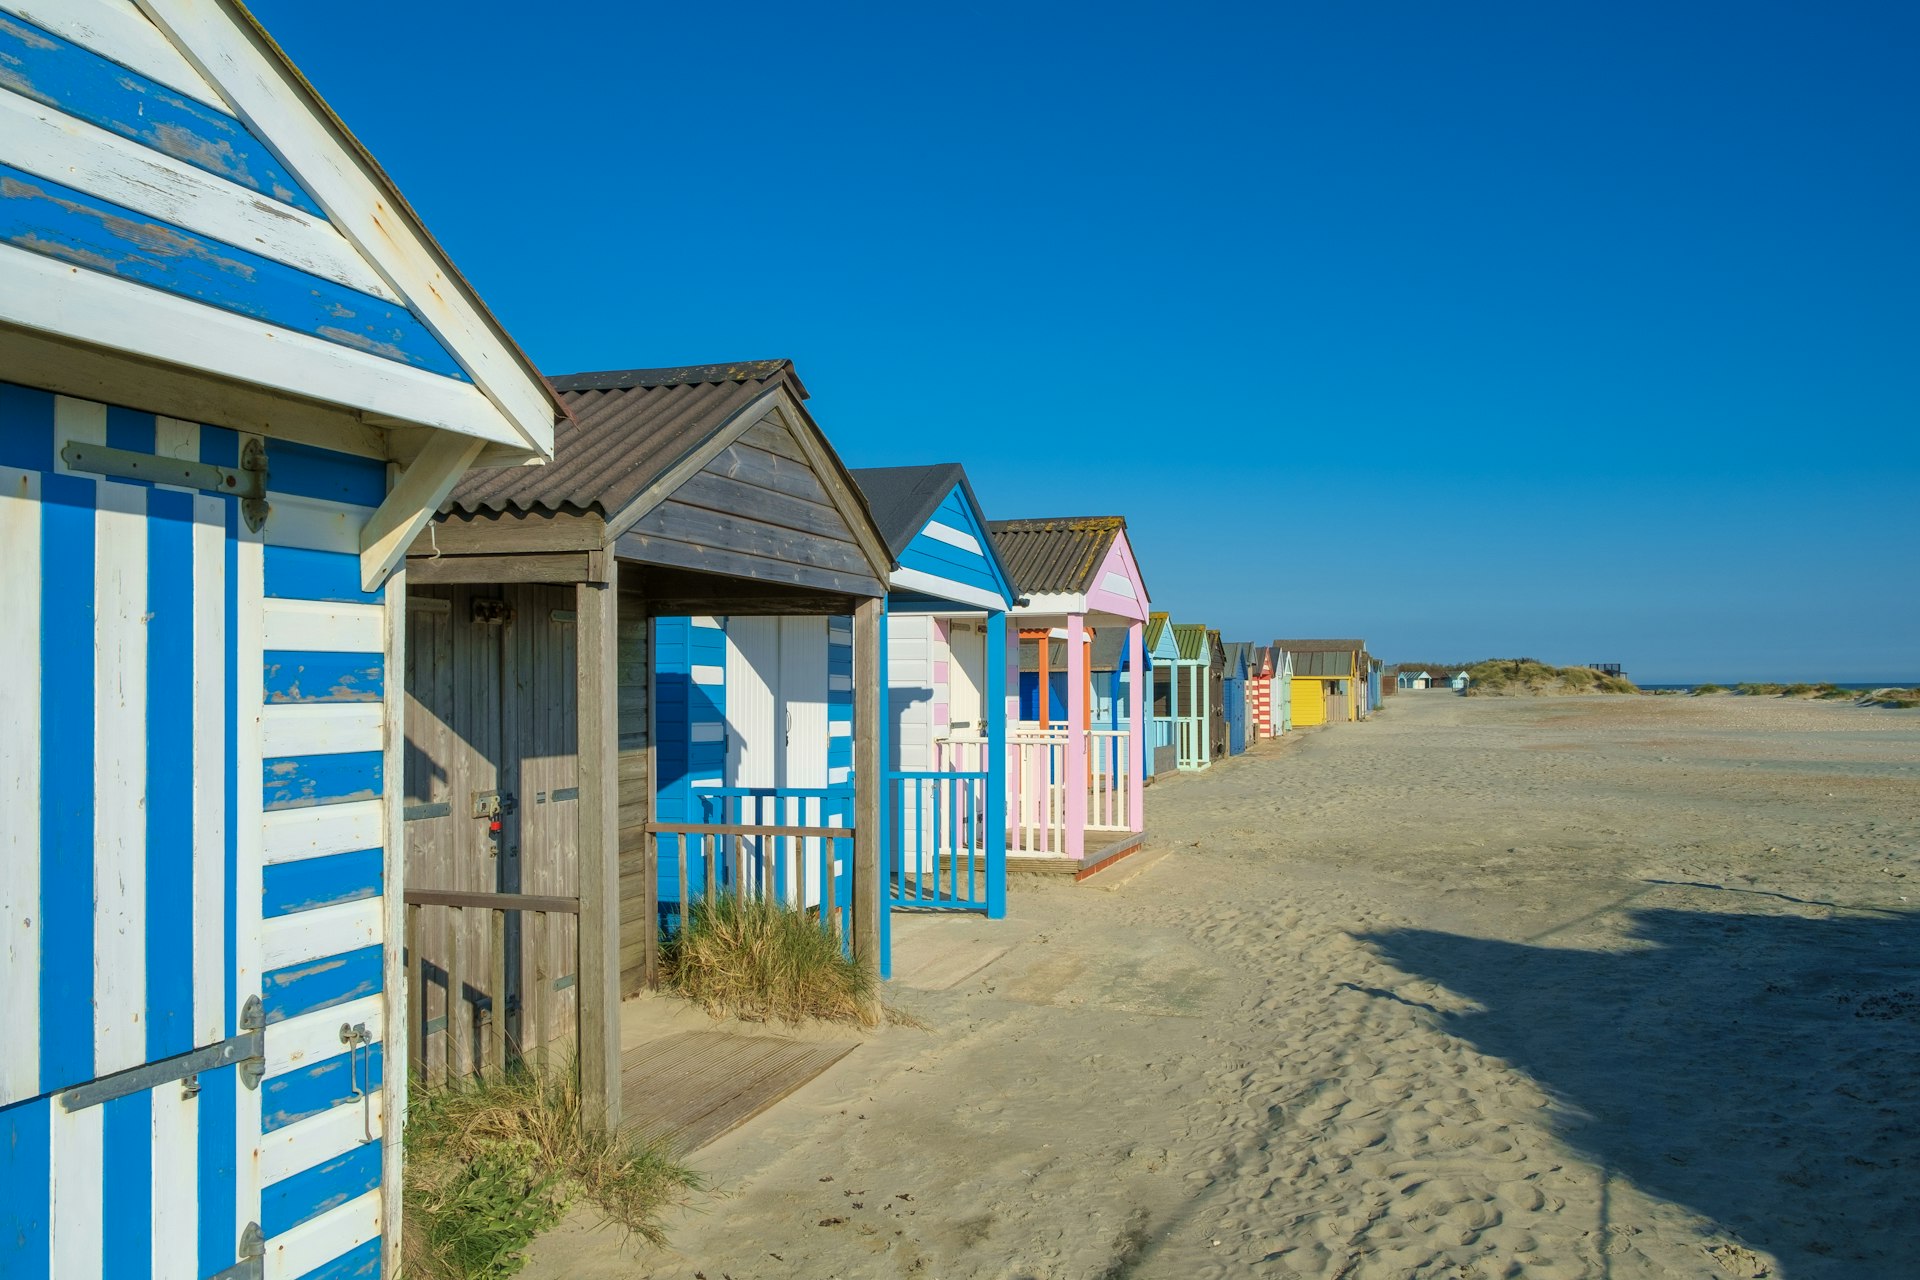 A row of colorful beach huts, West Wittering, UK